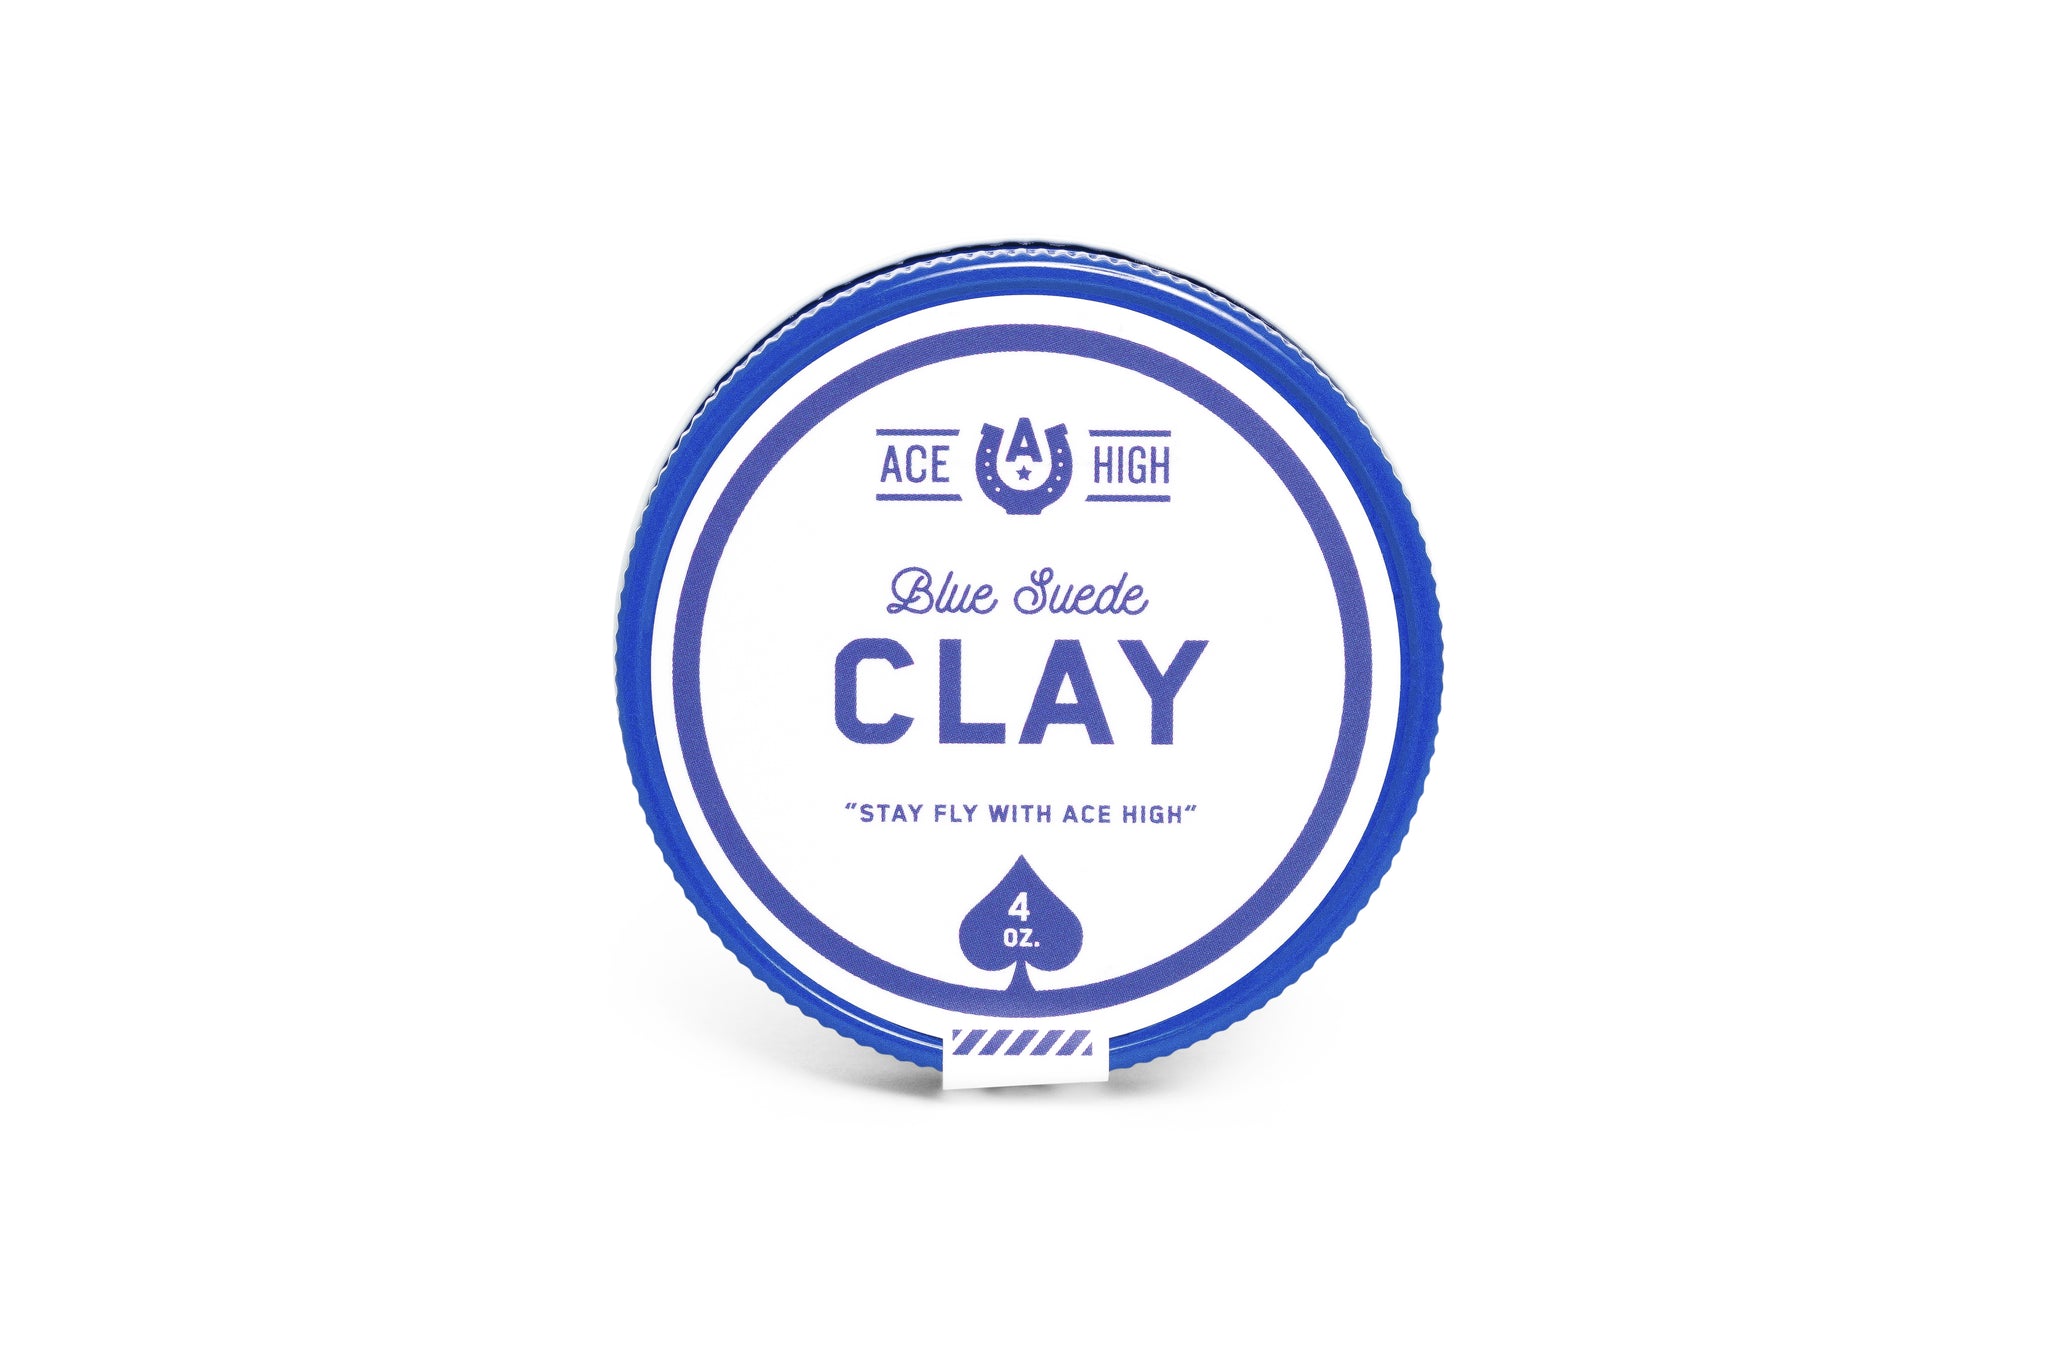 Blue Suede Clay - Hair Styling Clay